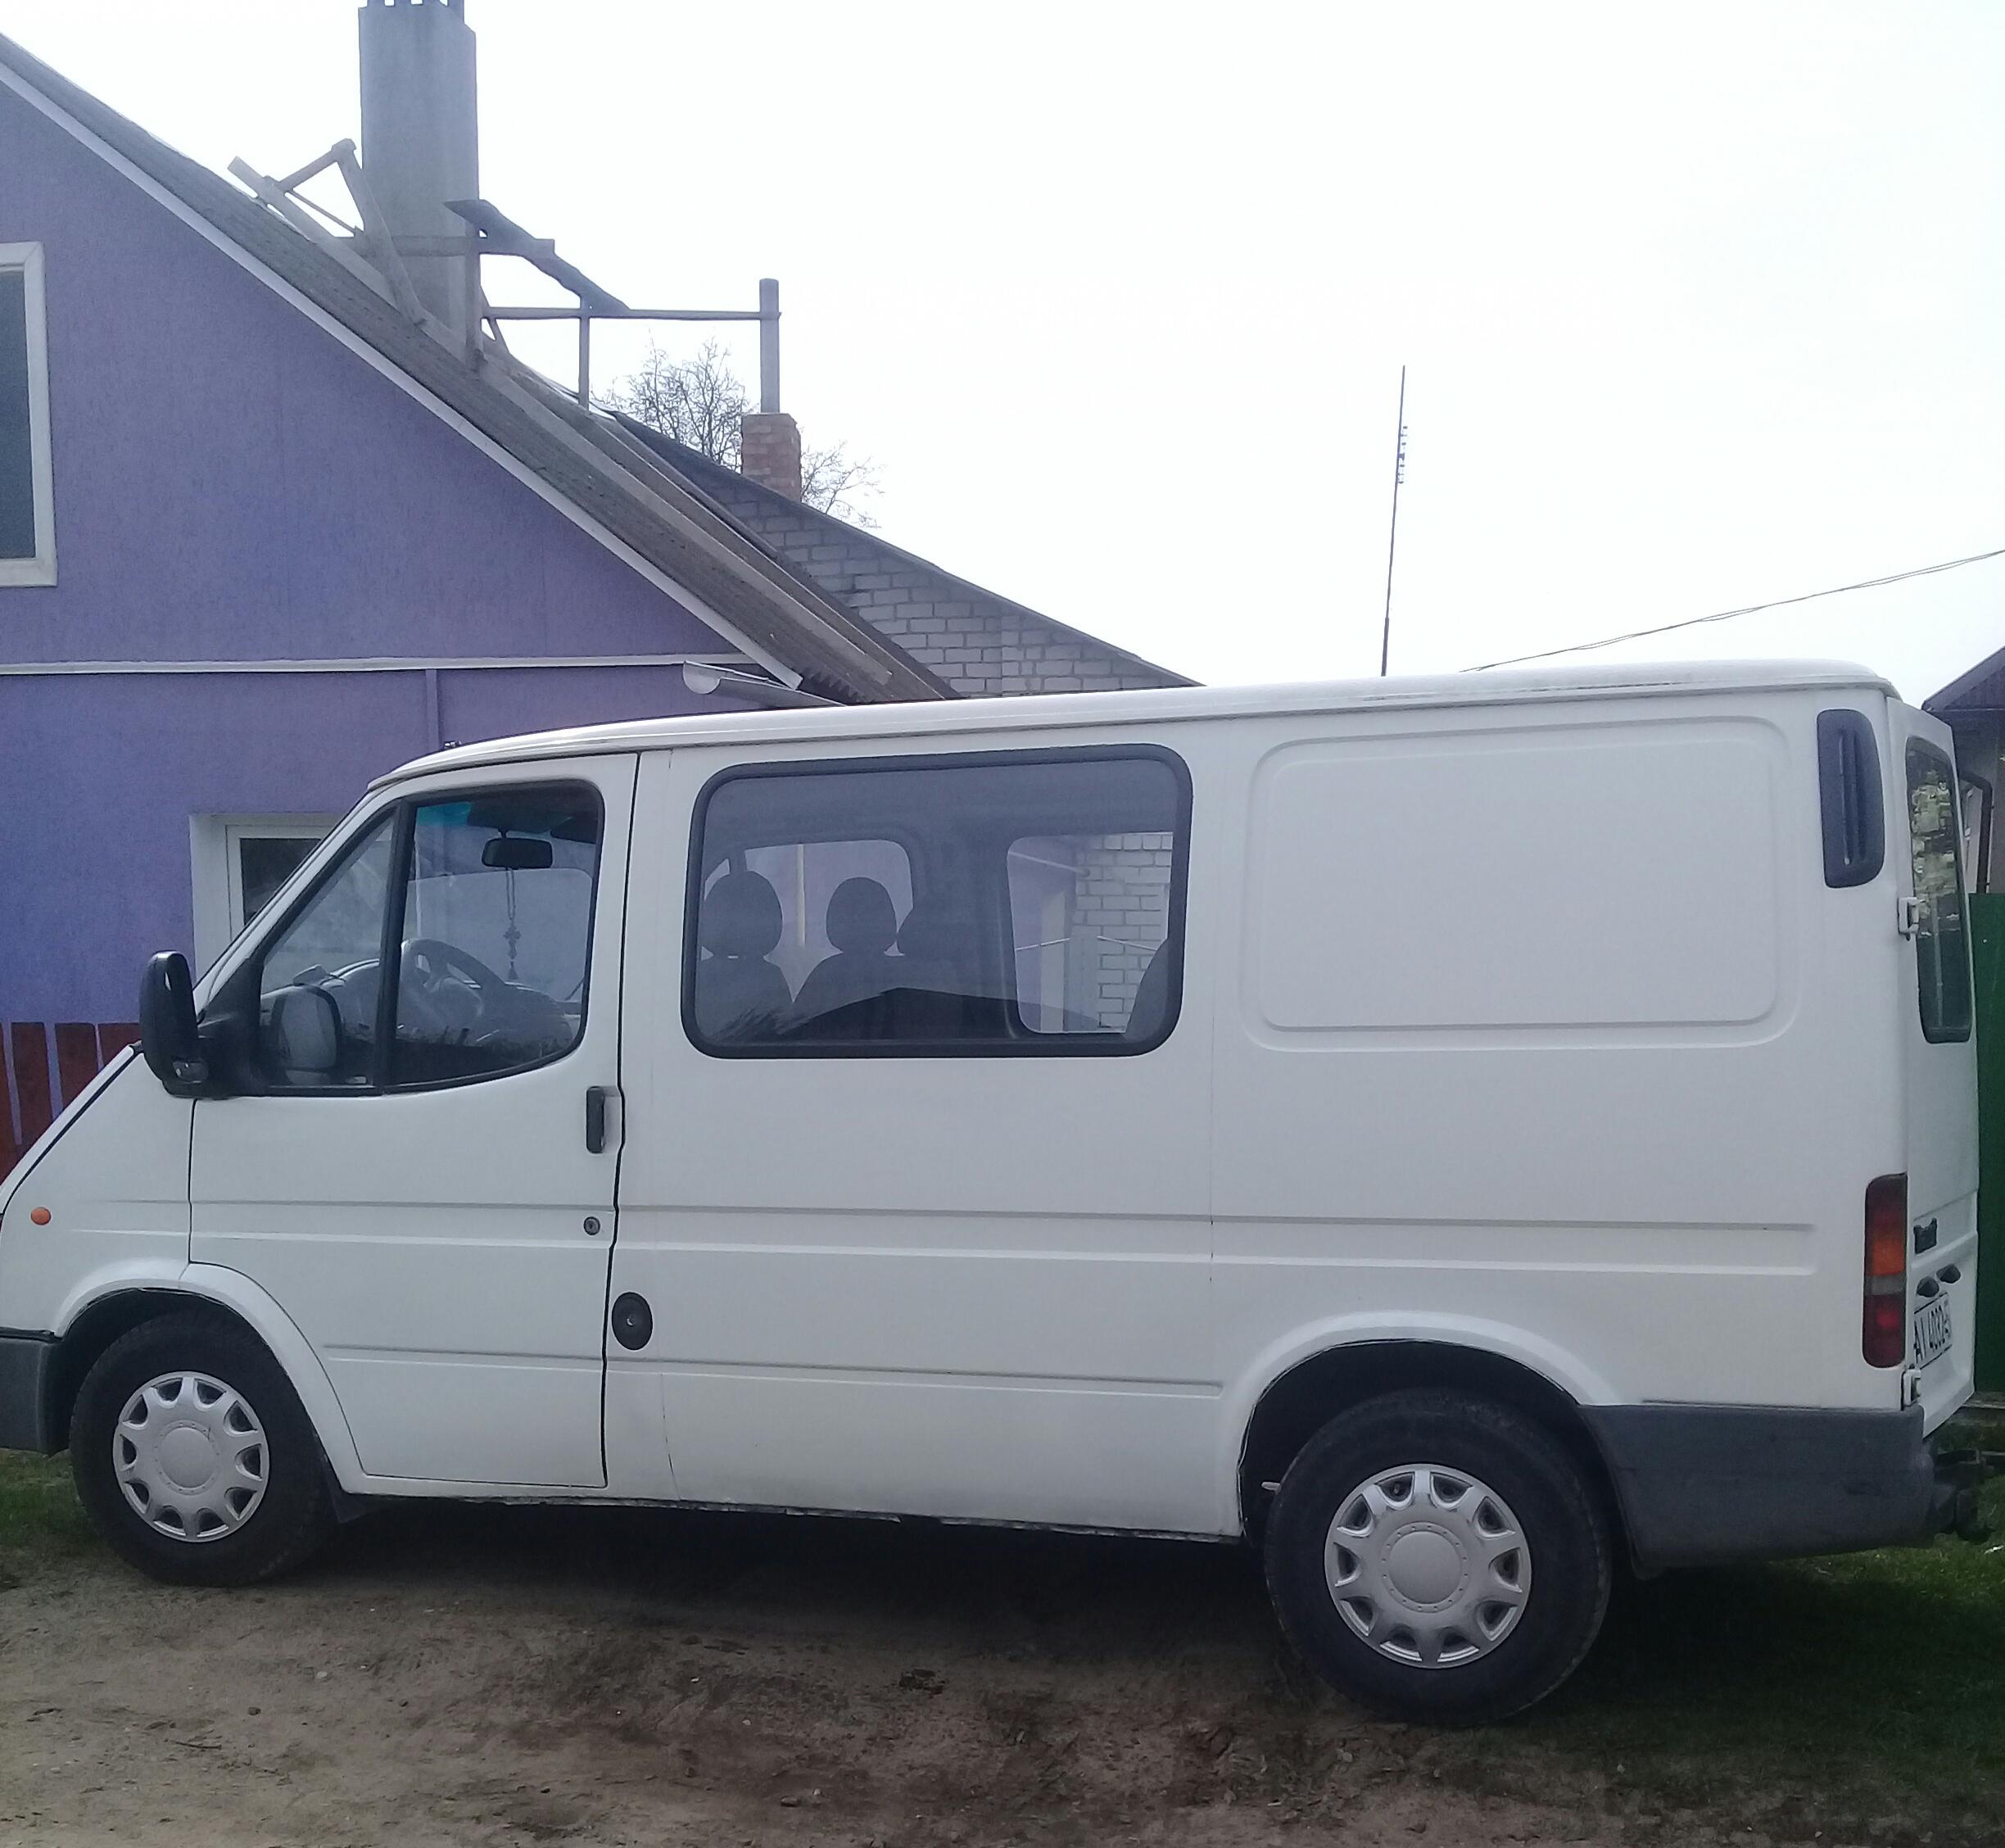 Ford Transit 1996. Форд Транзит 1996. Форд Транзит 1996 белый. Машина Форд Транзит 1996 год.